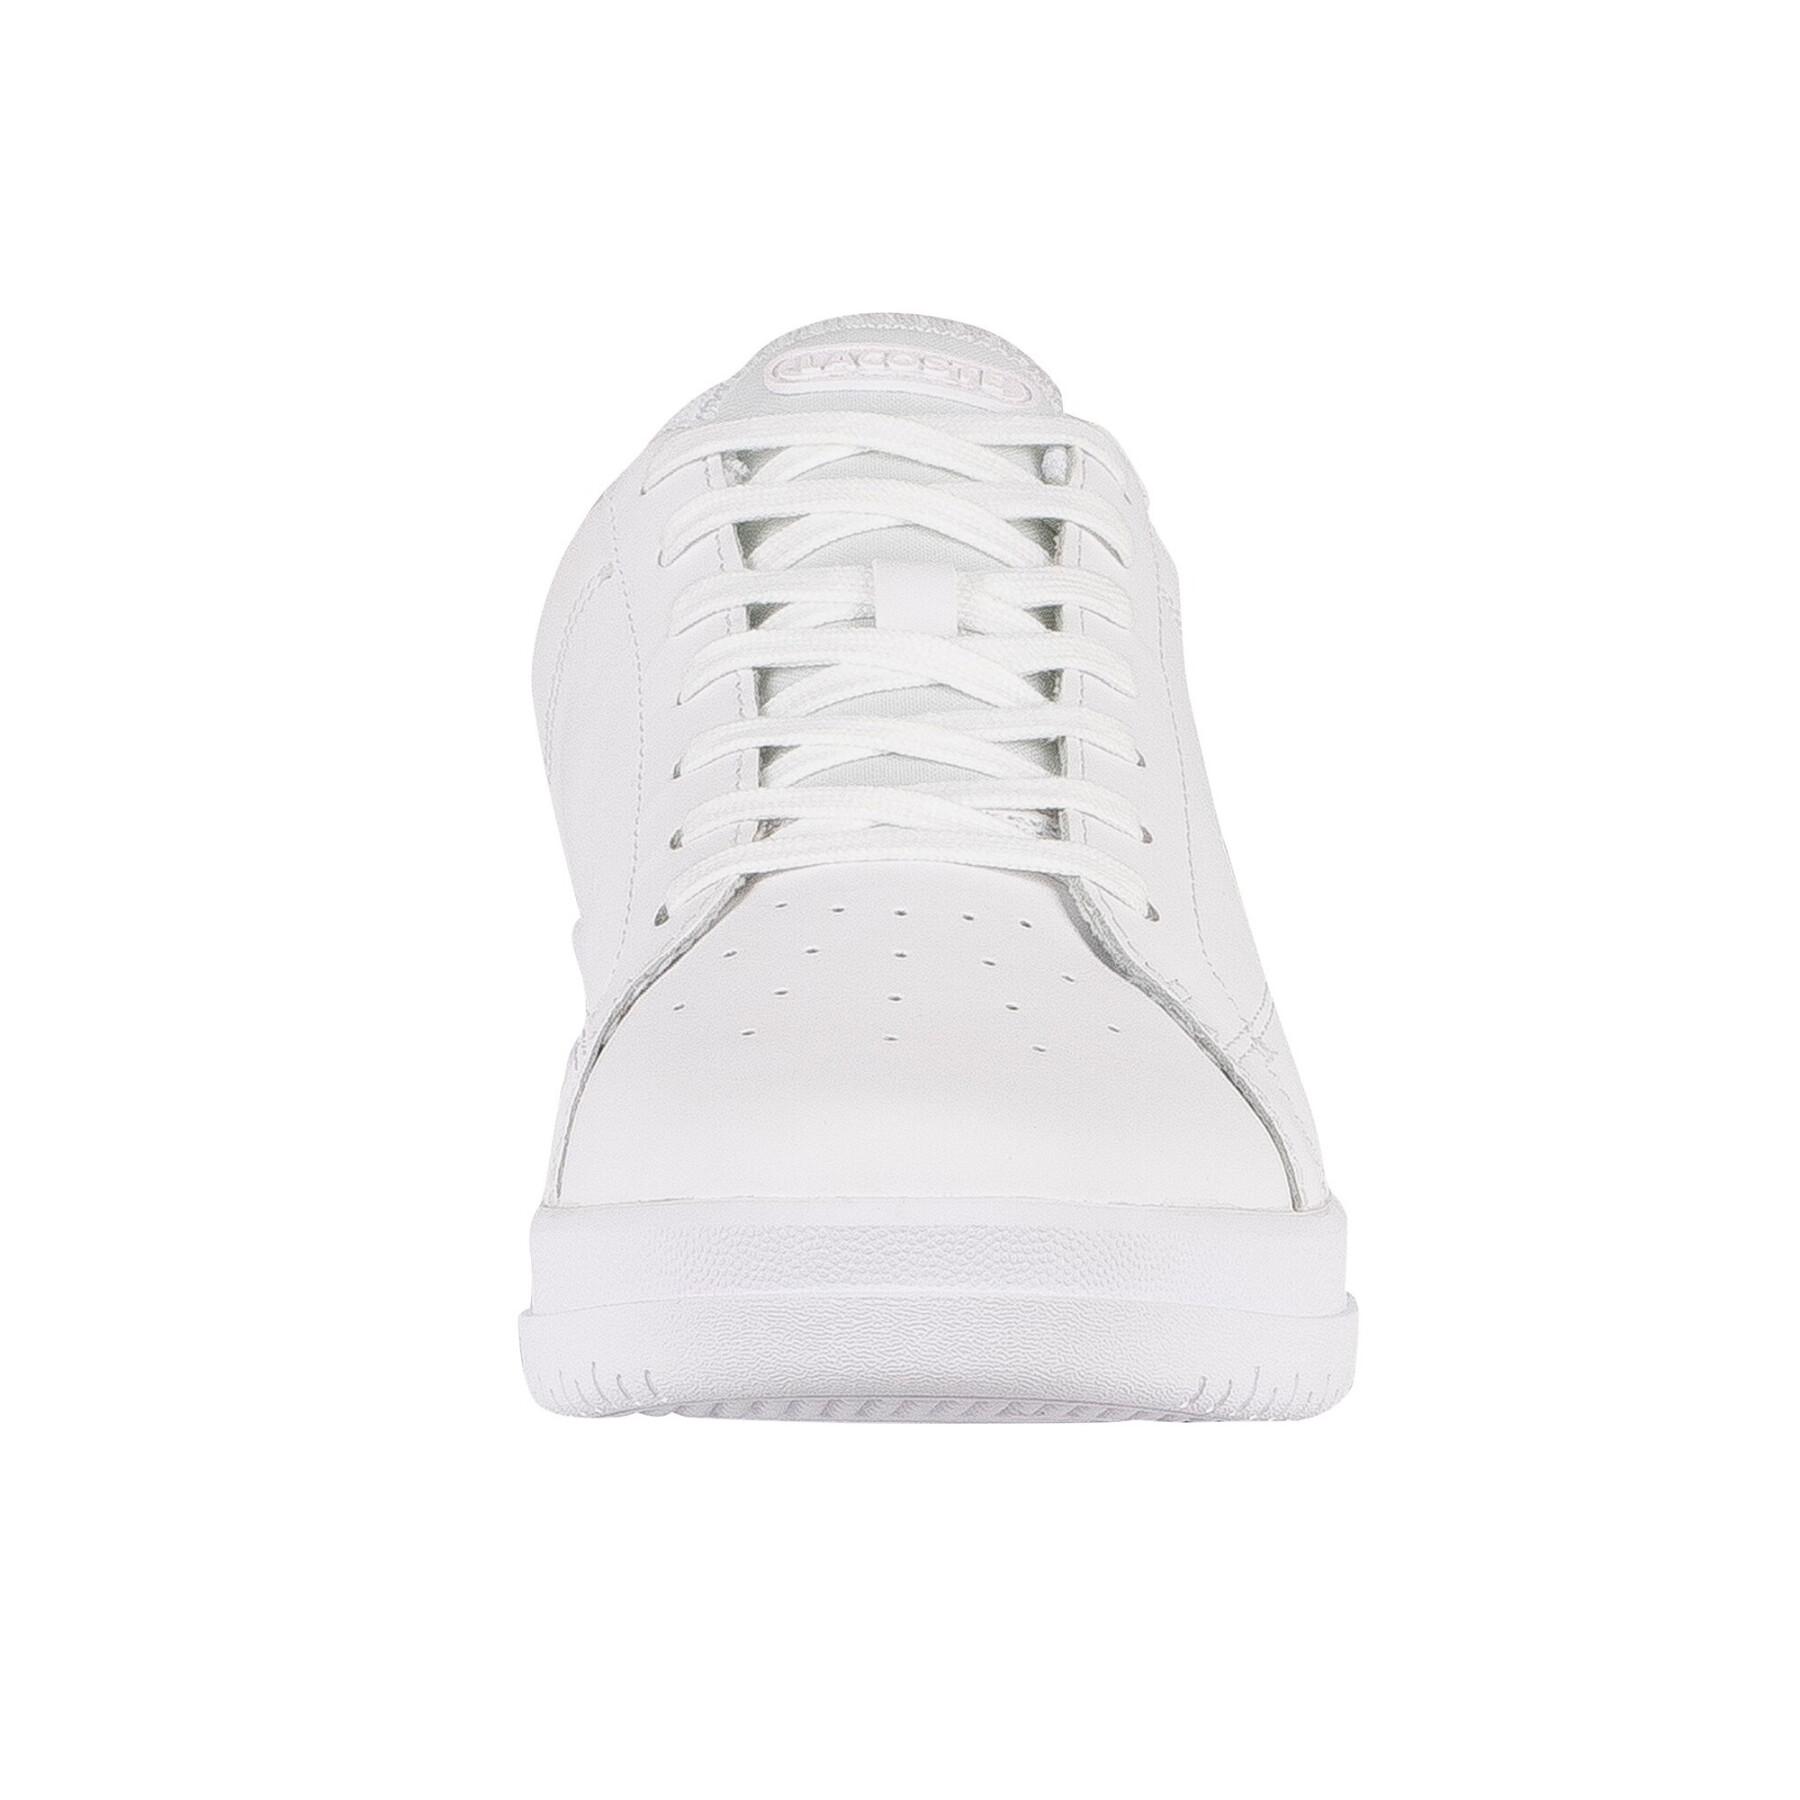 Formadores Lacoste Twin Serve